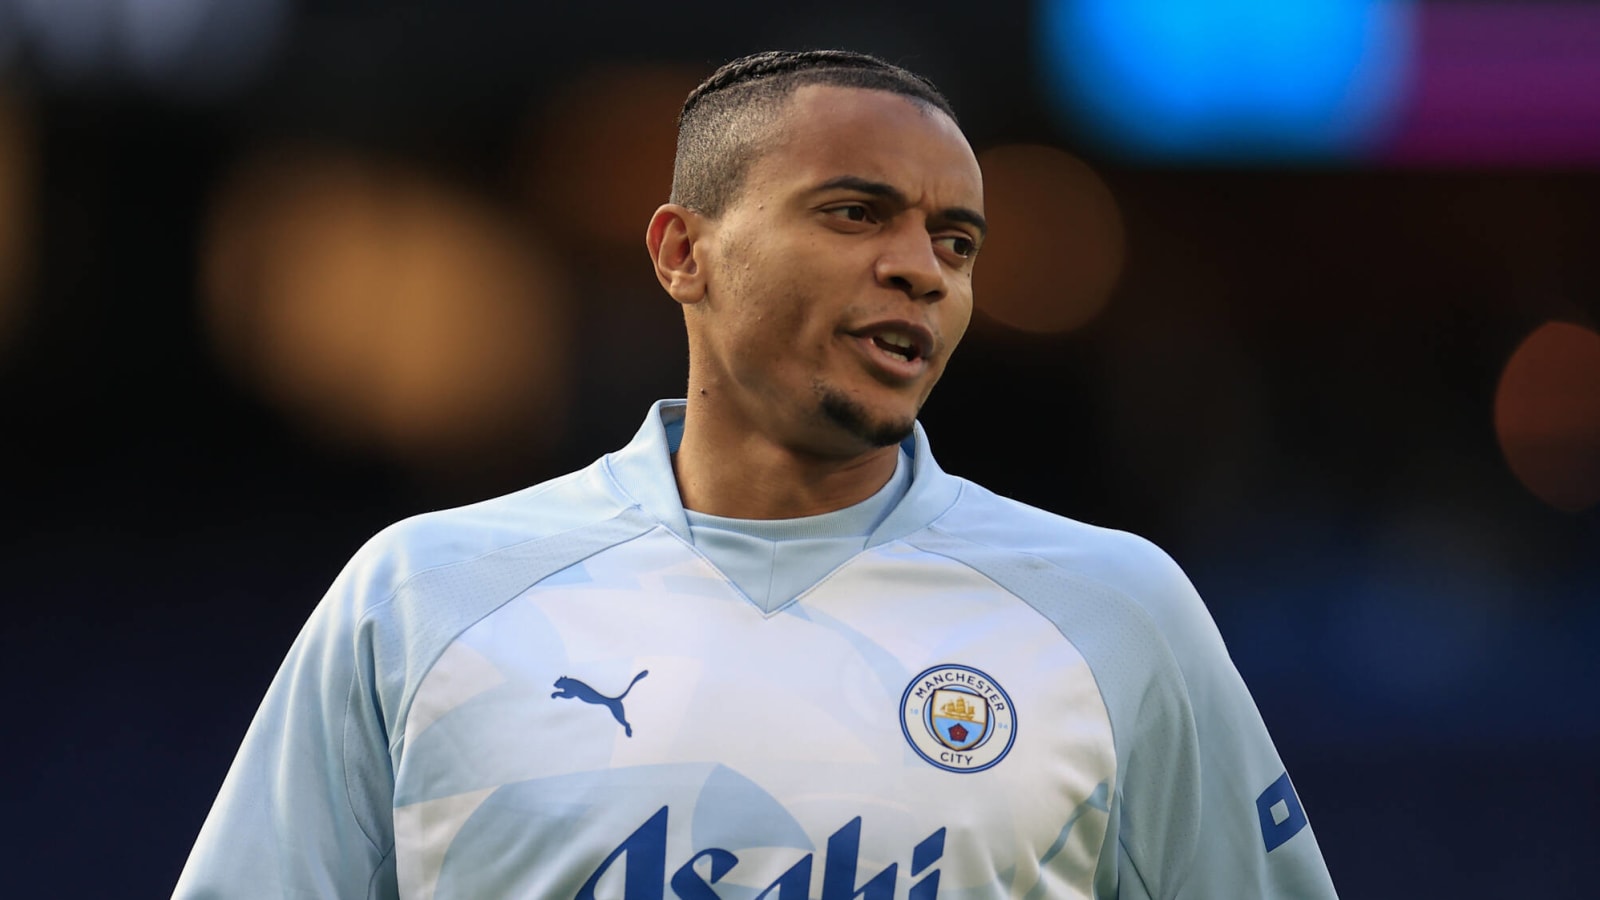 An injury to Manuel Akanji sours Manchester City’s win over Huddersfield Town